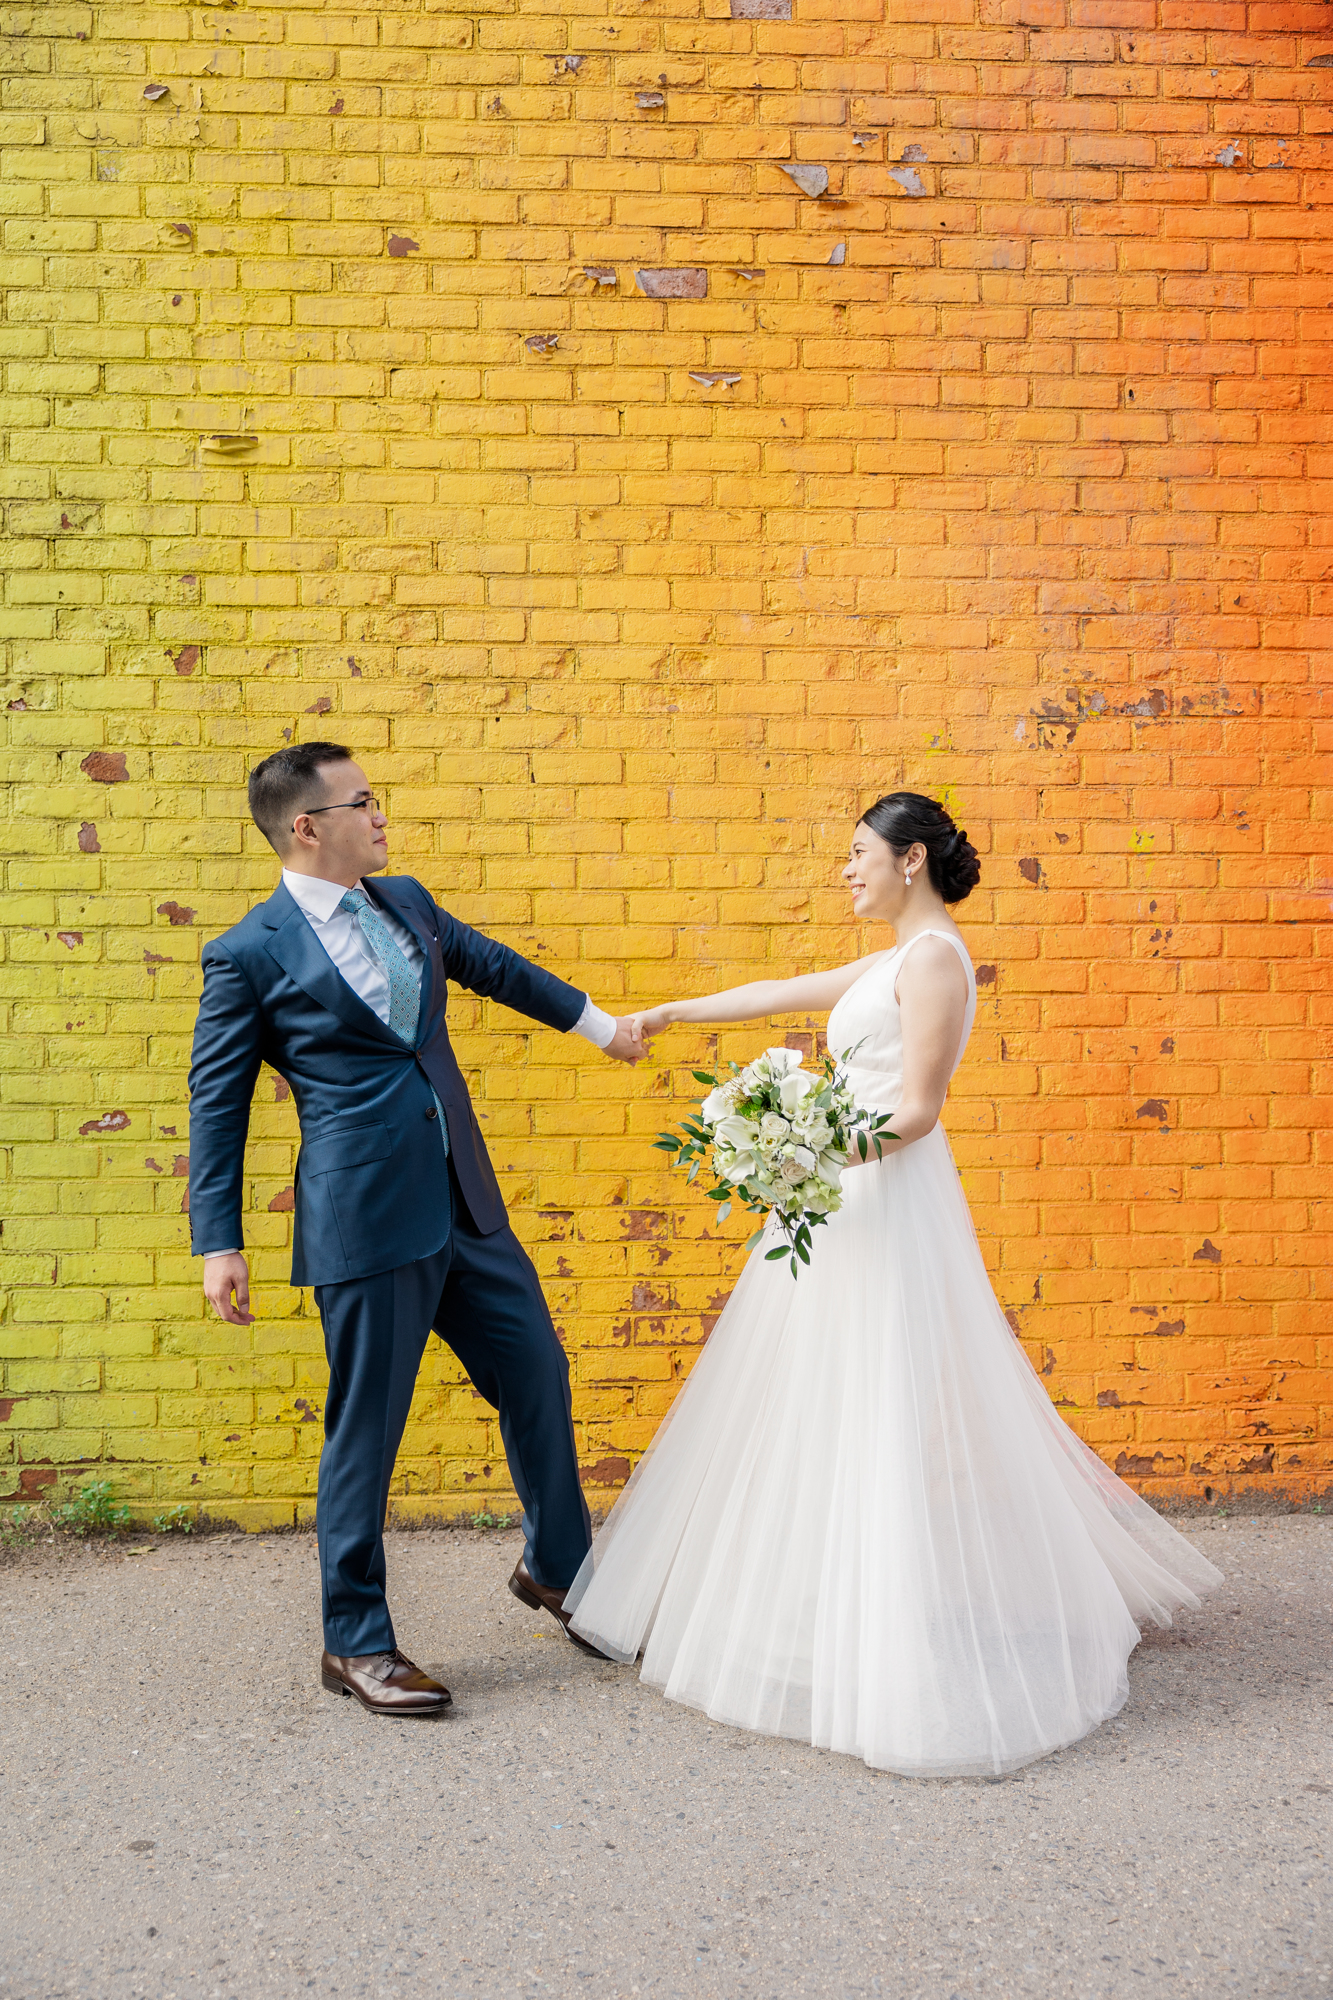 Best Restaurants to Eat at After a Fun DUMBO Elopement